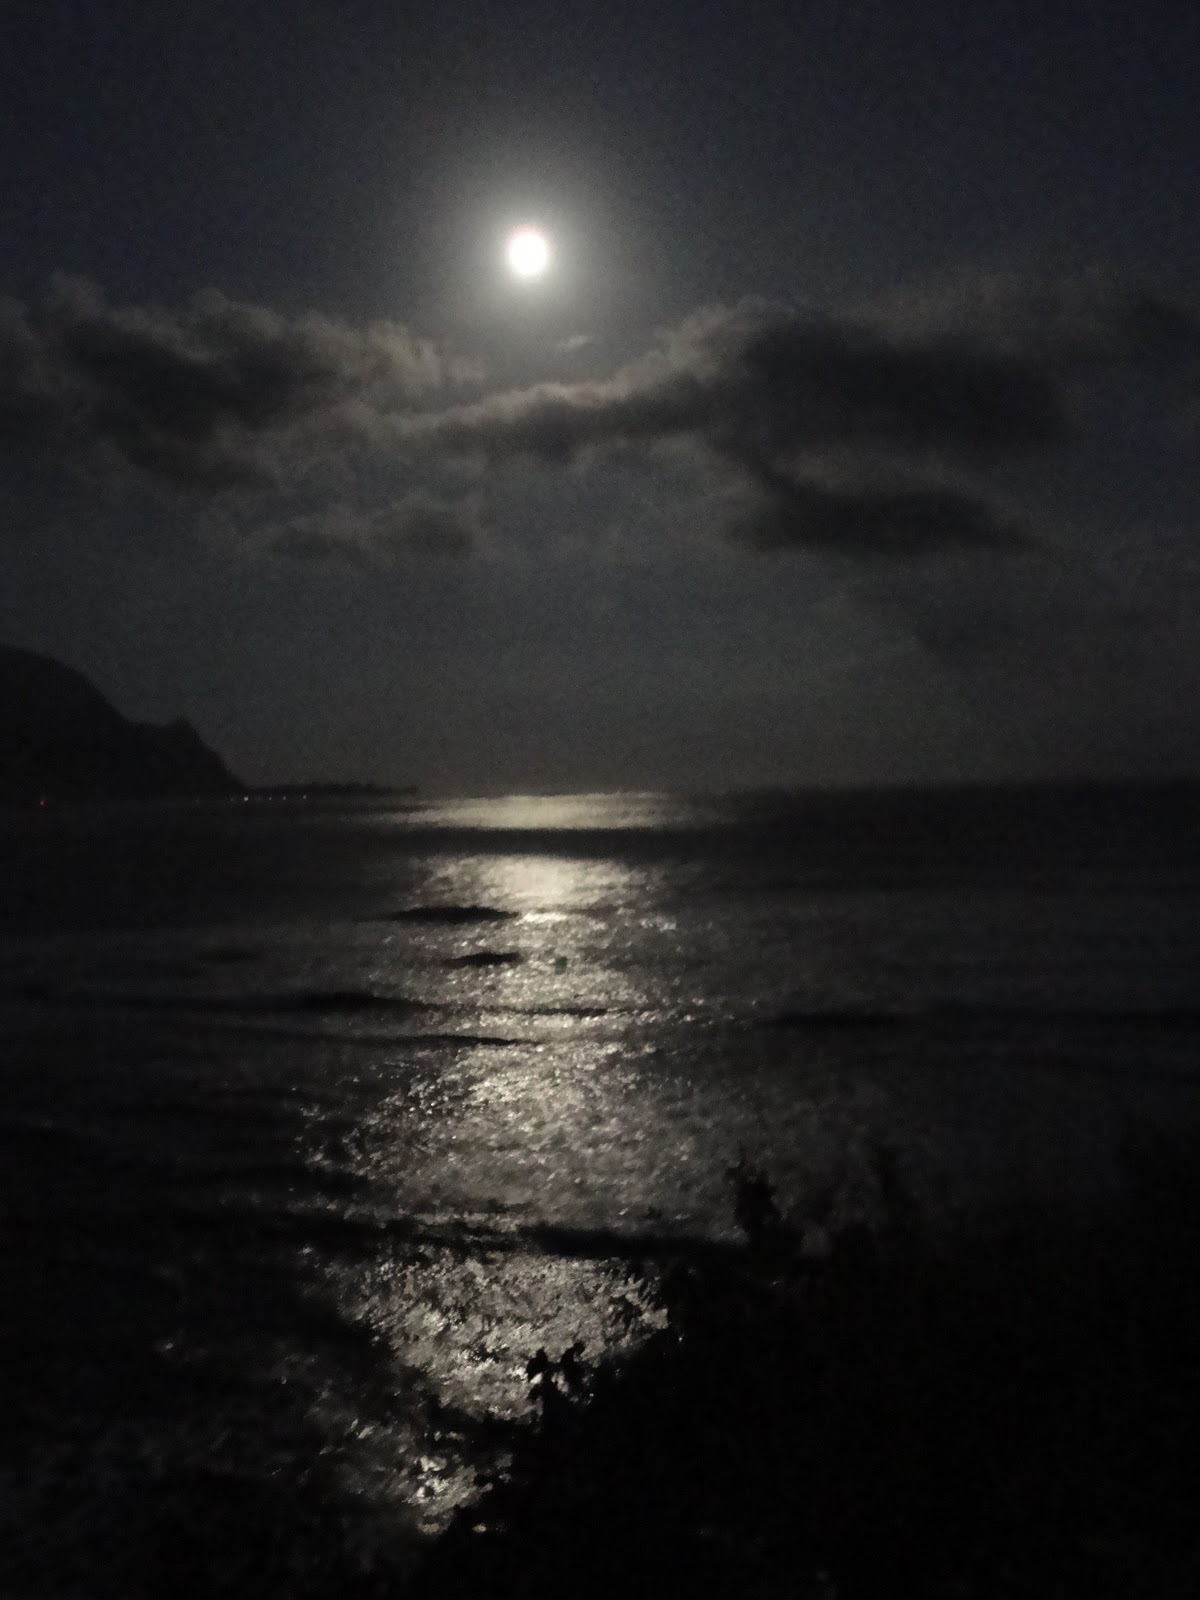 SIMPLE SOLUTIONS FOR PLANET EARTH AND HUMANITY: MOONSET AT HANALEI